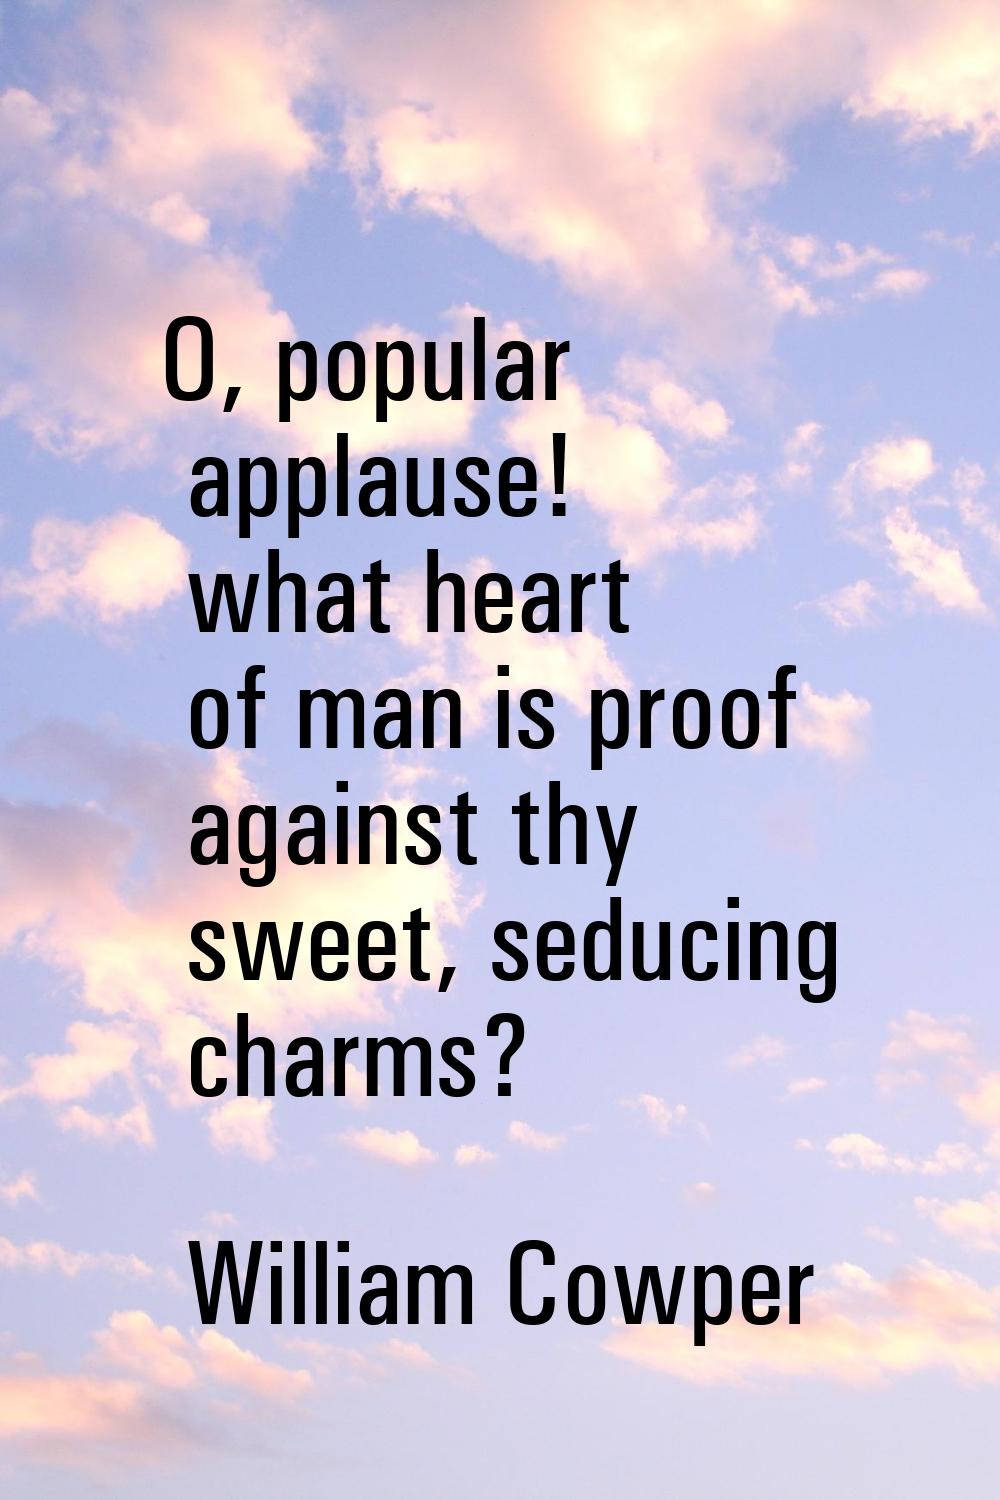 O, popular applause! what heart of man is proof against thy sweet, seducing charms?